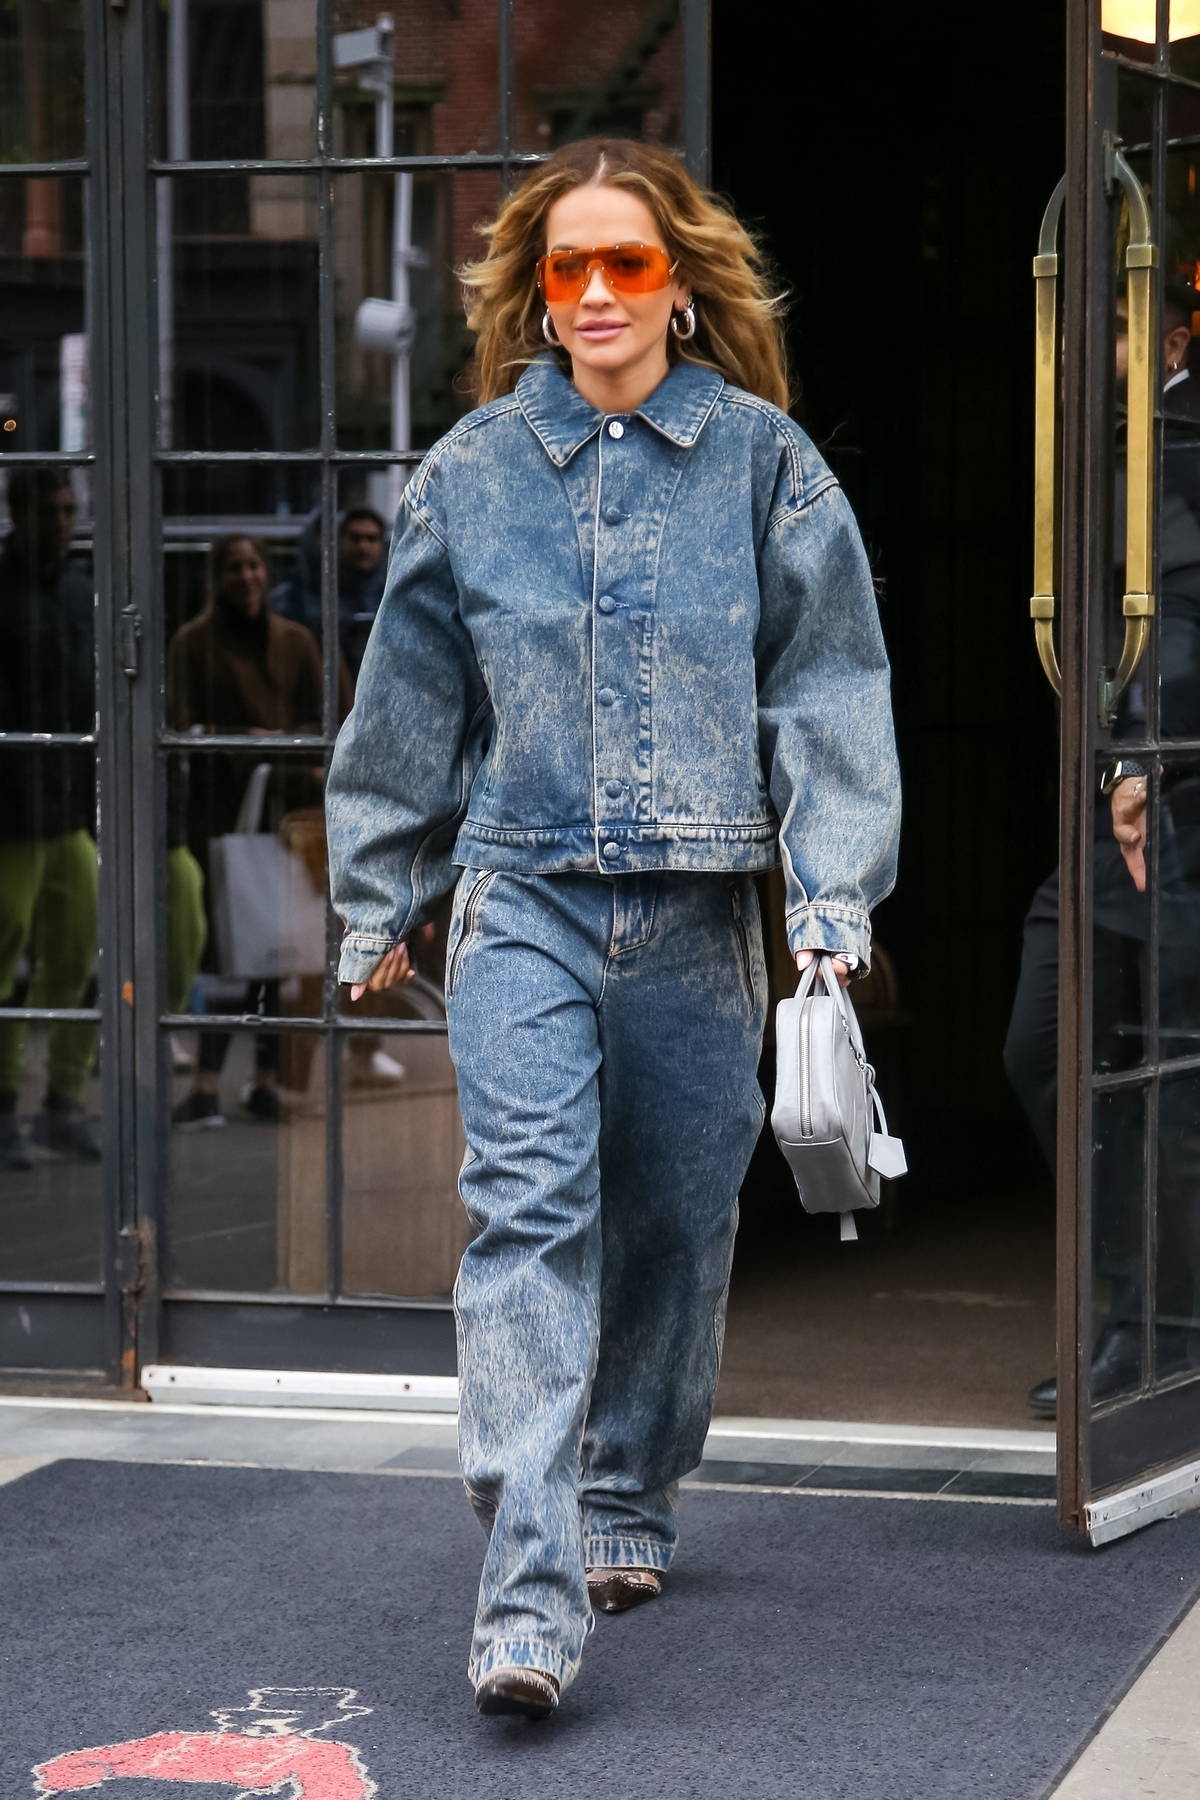 See How Style Stars Rocked Chic Denim this Week on #BellaStylista